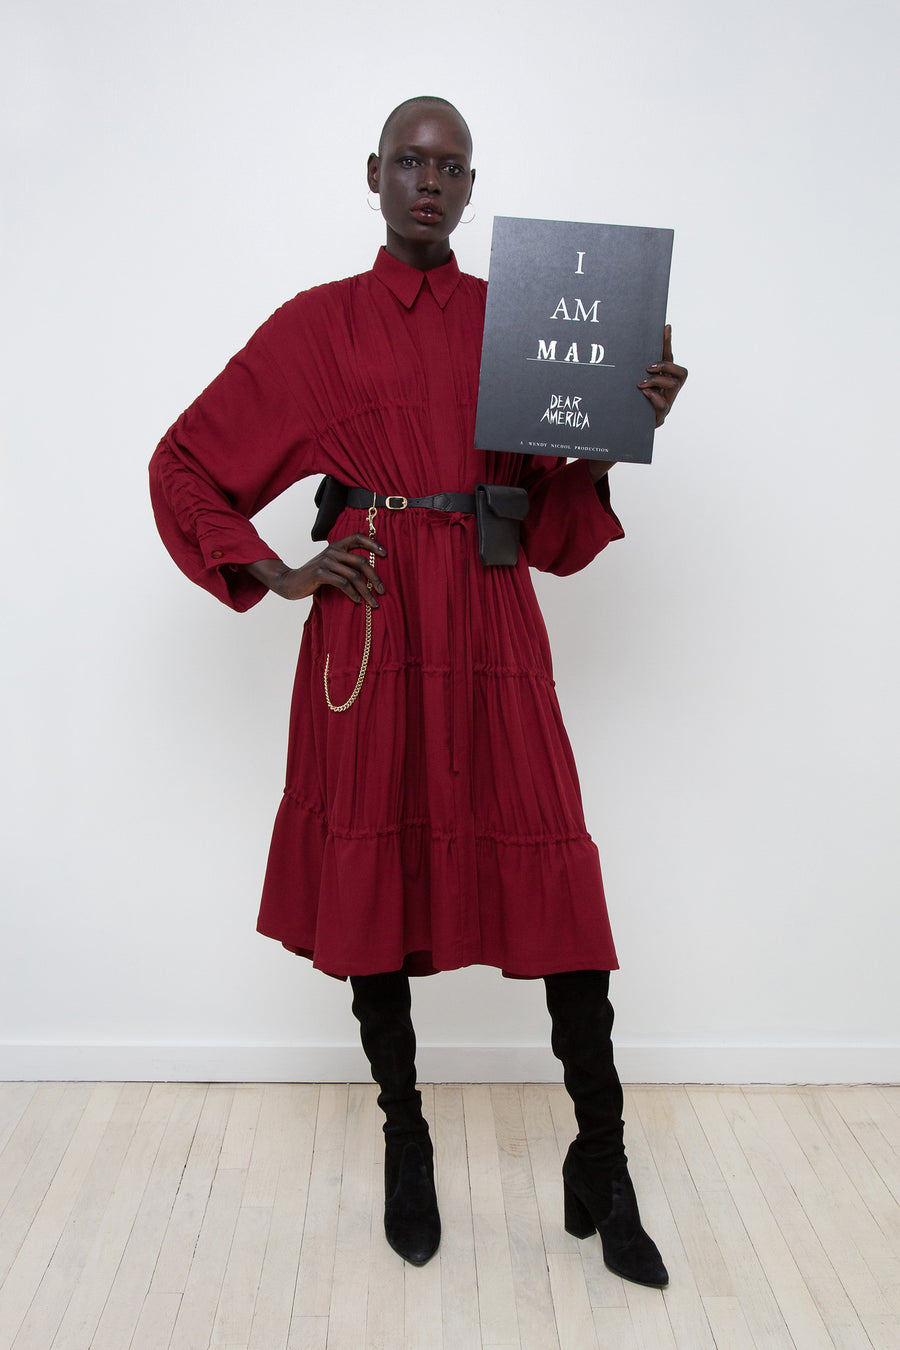 Ajak Deng IMG Model Wendy Nichol AW17 Clothing Fashion Anti Fascist Runway Show Dear America Handmade in NYC New York City Protest March I AM Drawstring Draw String Dress Coat Ruche Ruffle Collar Shirt Dress Red Long sleeves Blouse invisible buttons secret pockets Protest March 